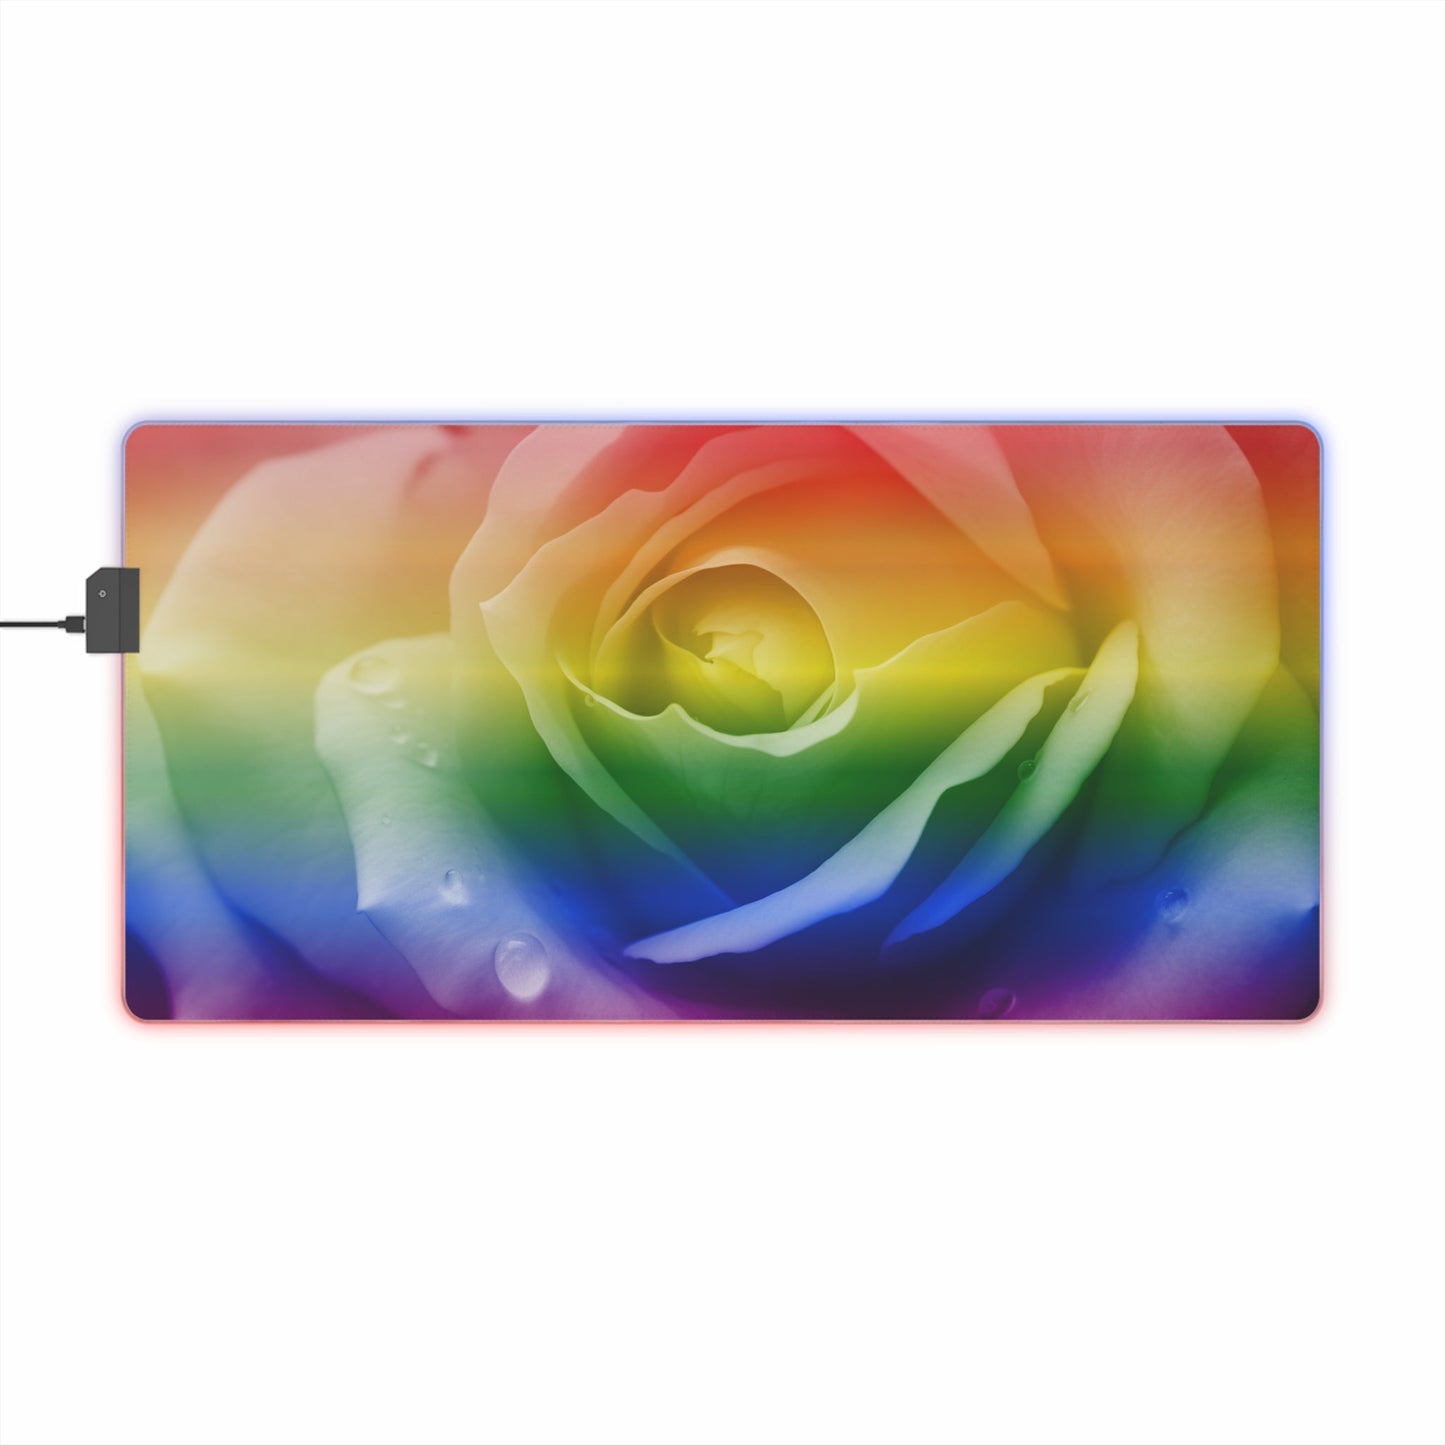 27.6 x 13.8 / Rectangle 15 Proud Rose LED Gaming Mouse Pad